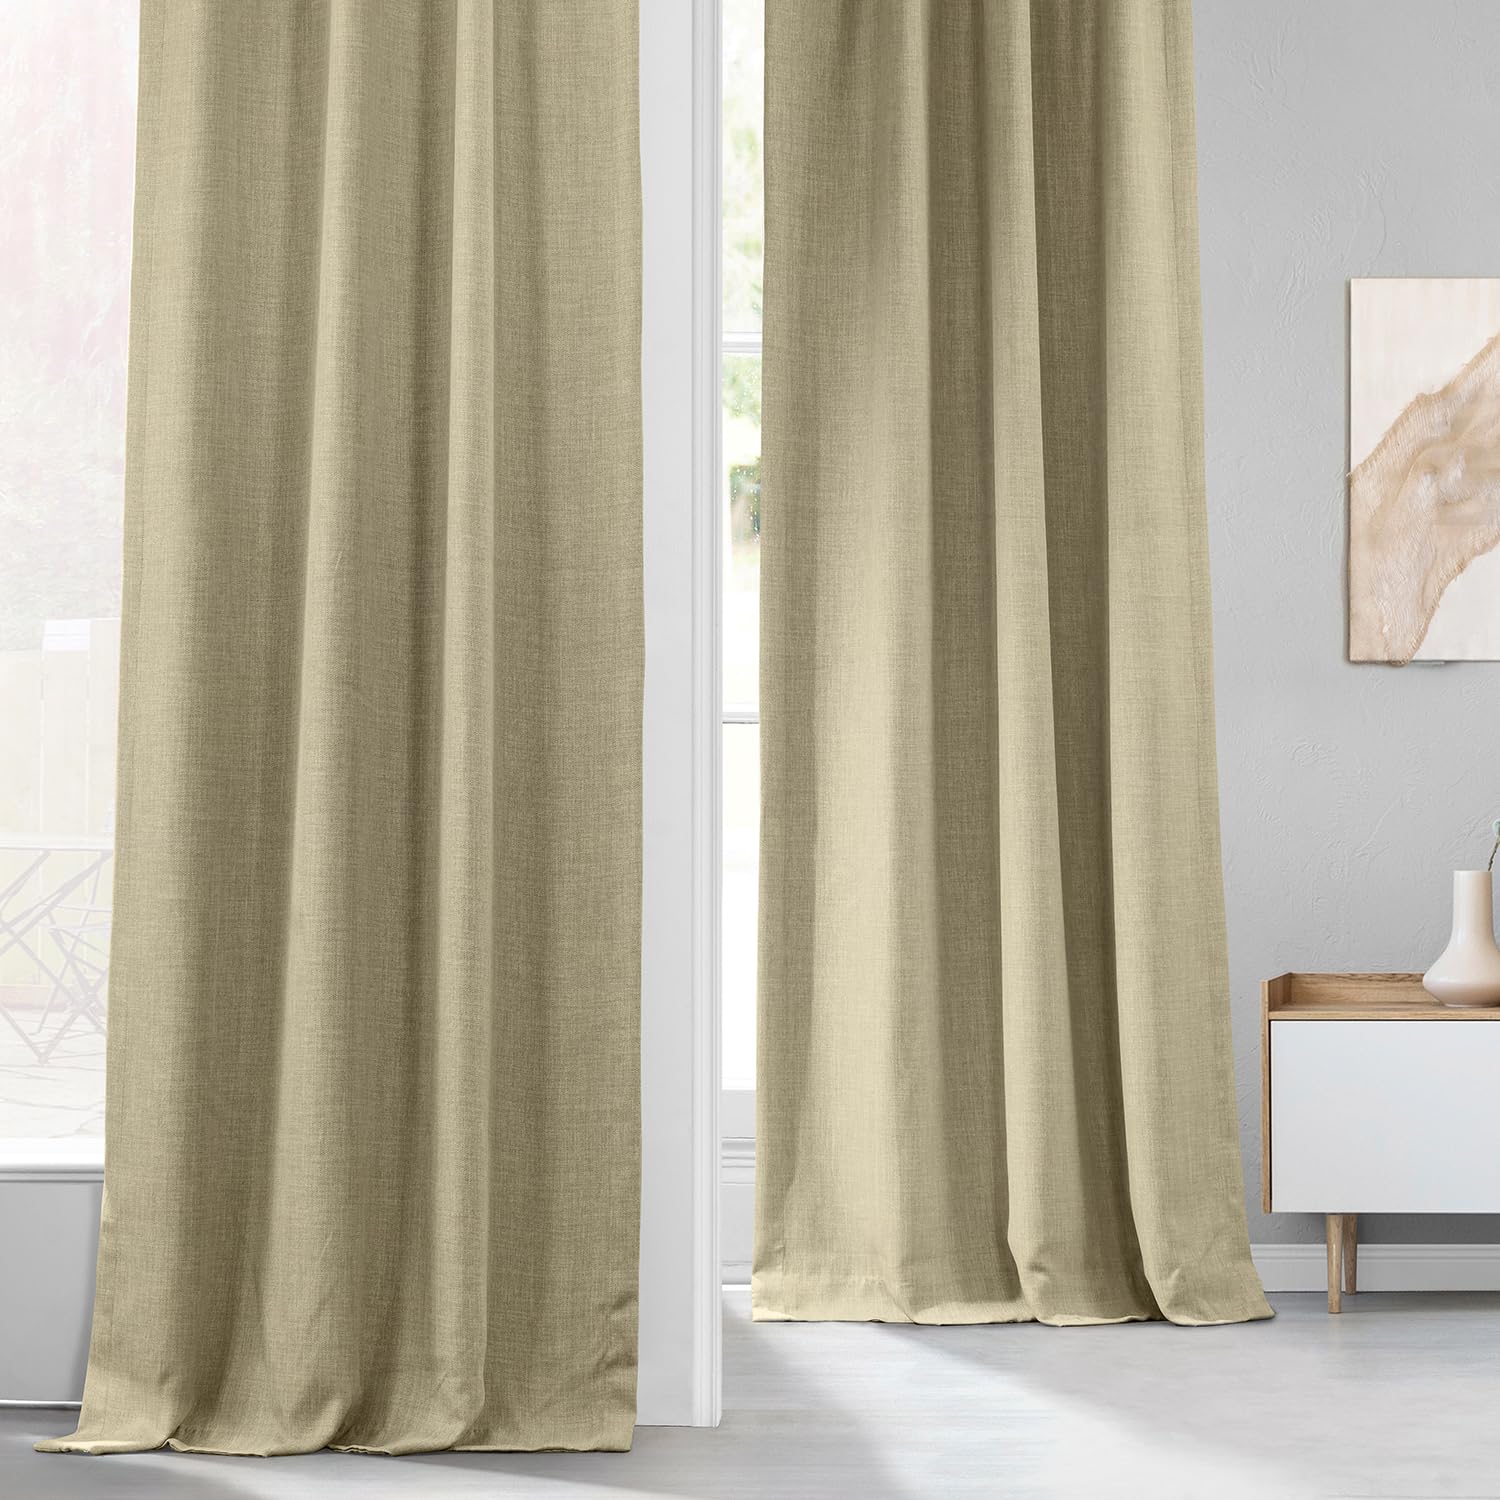 HPD Half Price Drapes Faux Linen Room Darkening Curtains - 96 Inches Long Luxury Linen Curtains for Bedroom & Living Room (1 Panel), 50W X 96L, Thatched Tan